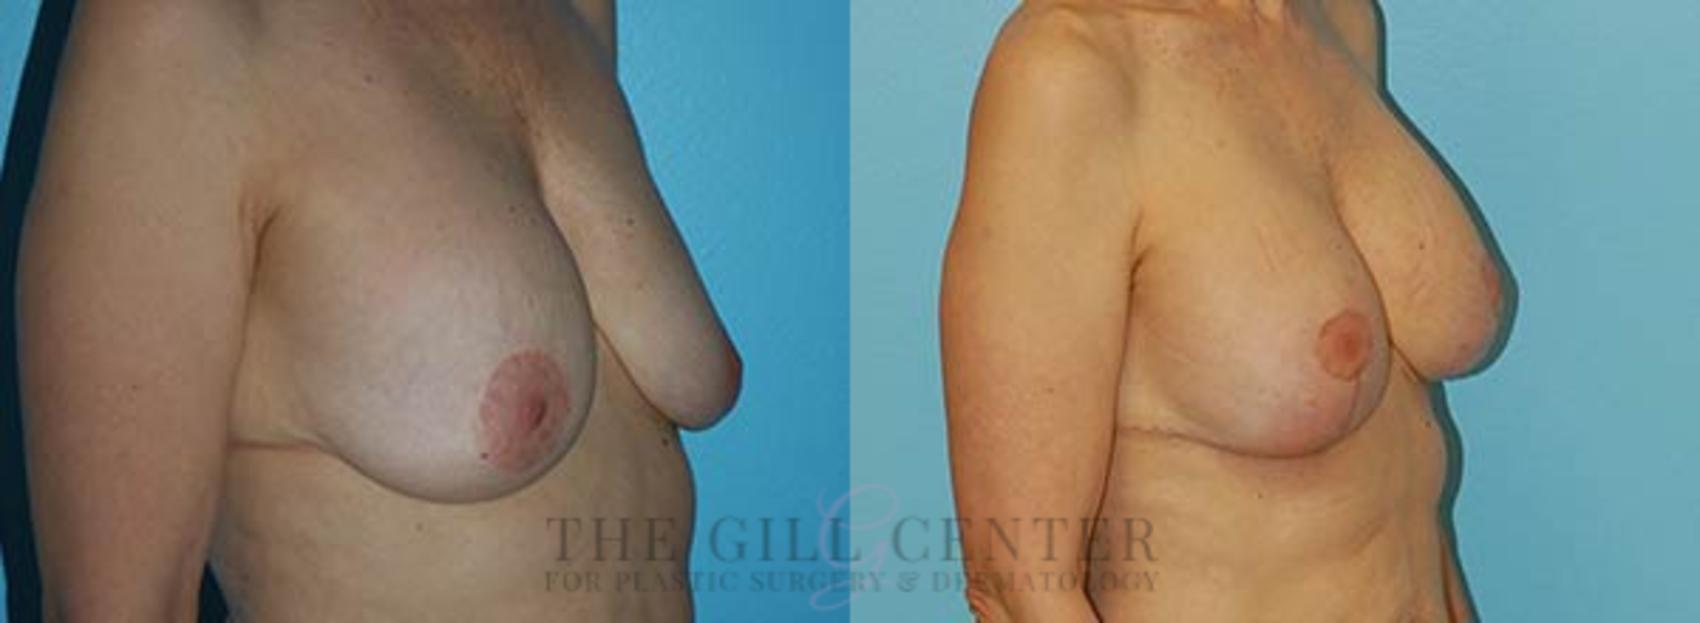 Breast Revisions Case 112 Before & After Right Oblique | The Woodlands, TX | The Gill Center for Plastic Surgery and Dermatology